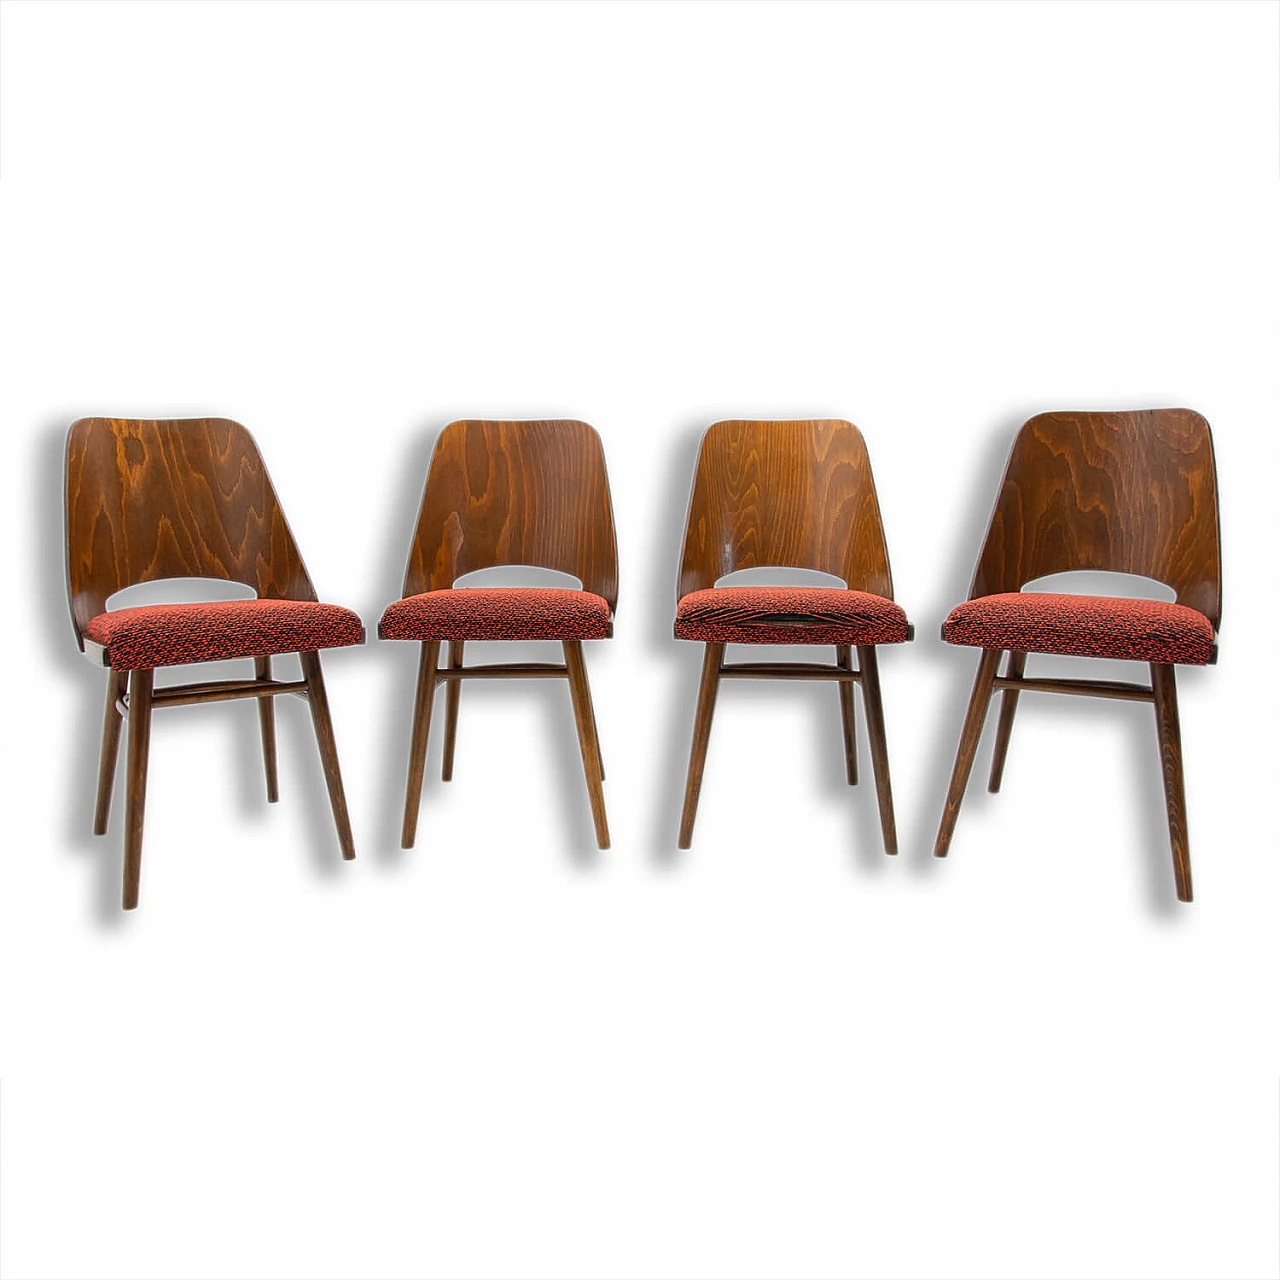 4 Wood and fabric chairs by Radomír Hofman for TON, 1960s 1